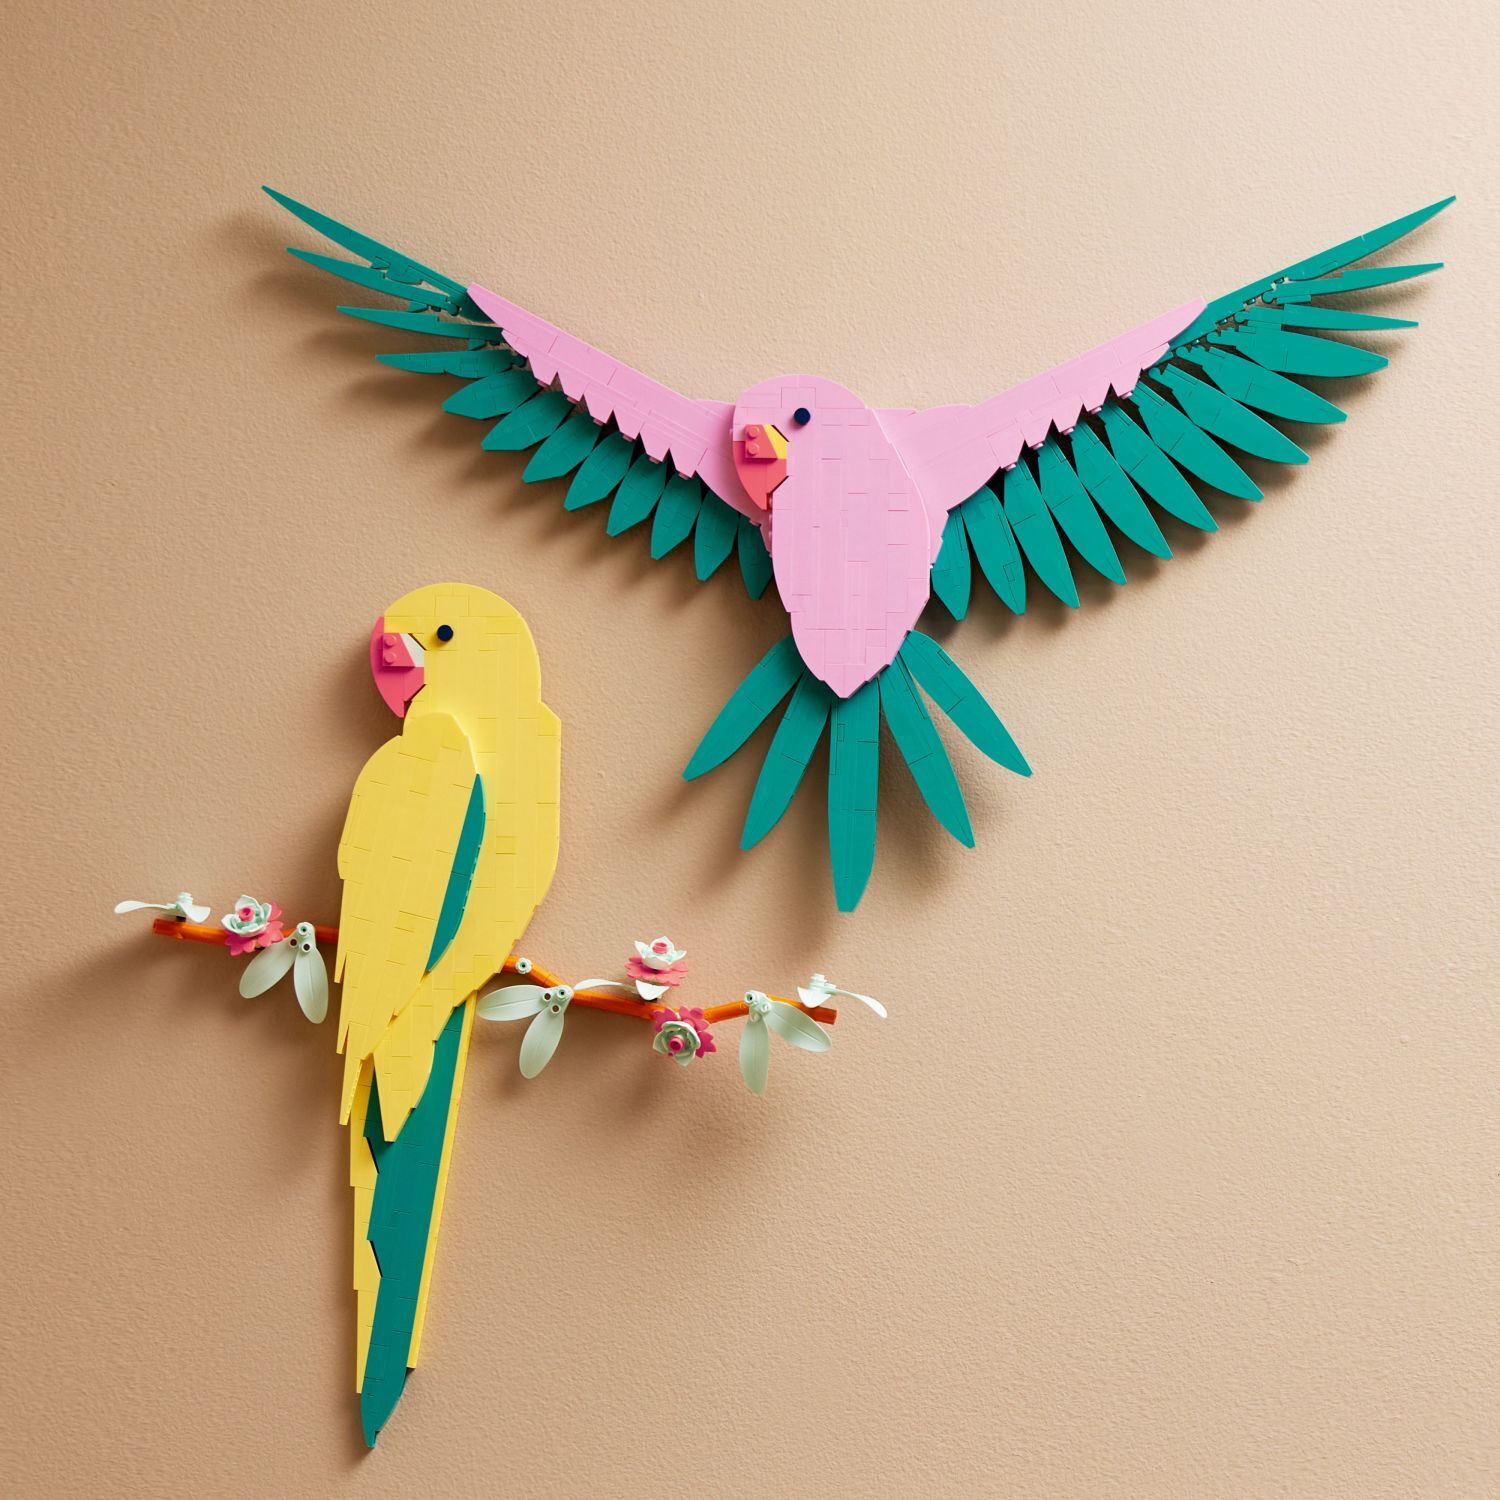 LEGO ART: The Fauna Collection – Macaw Parrots